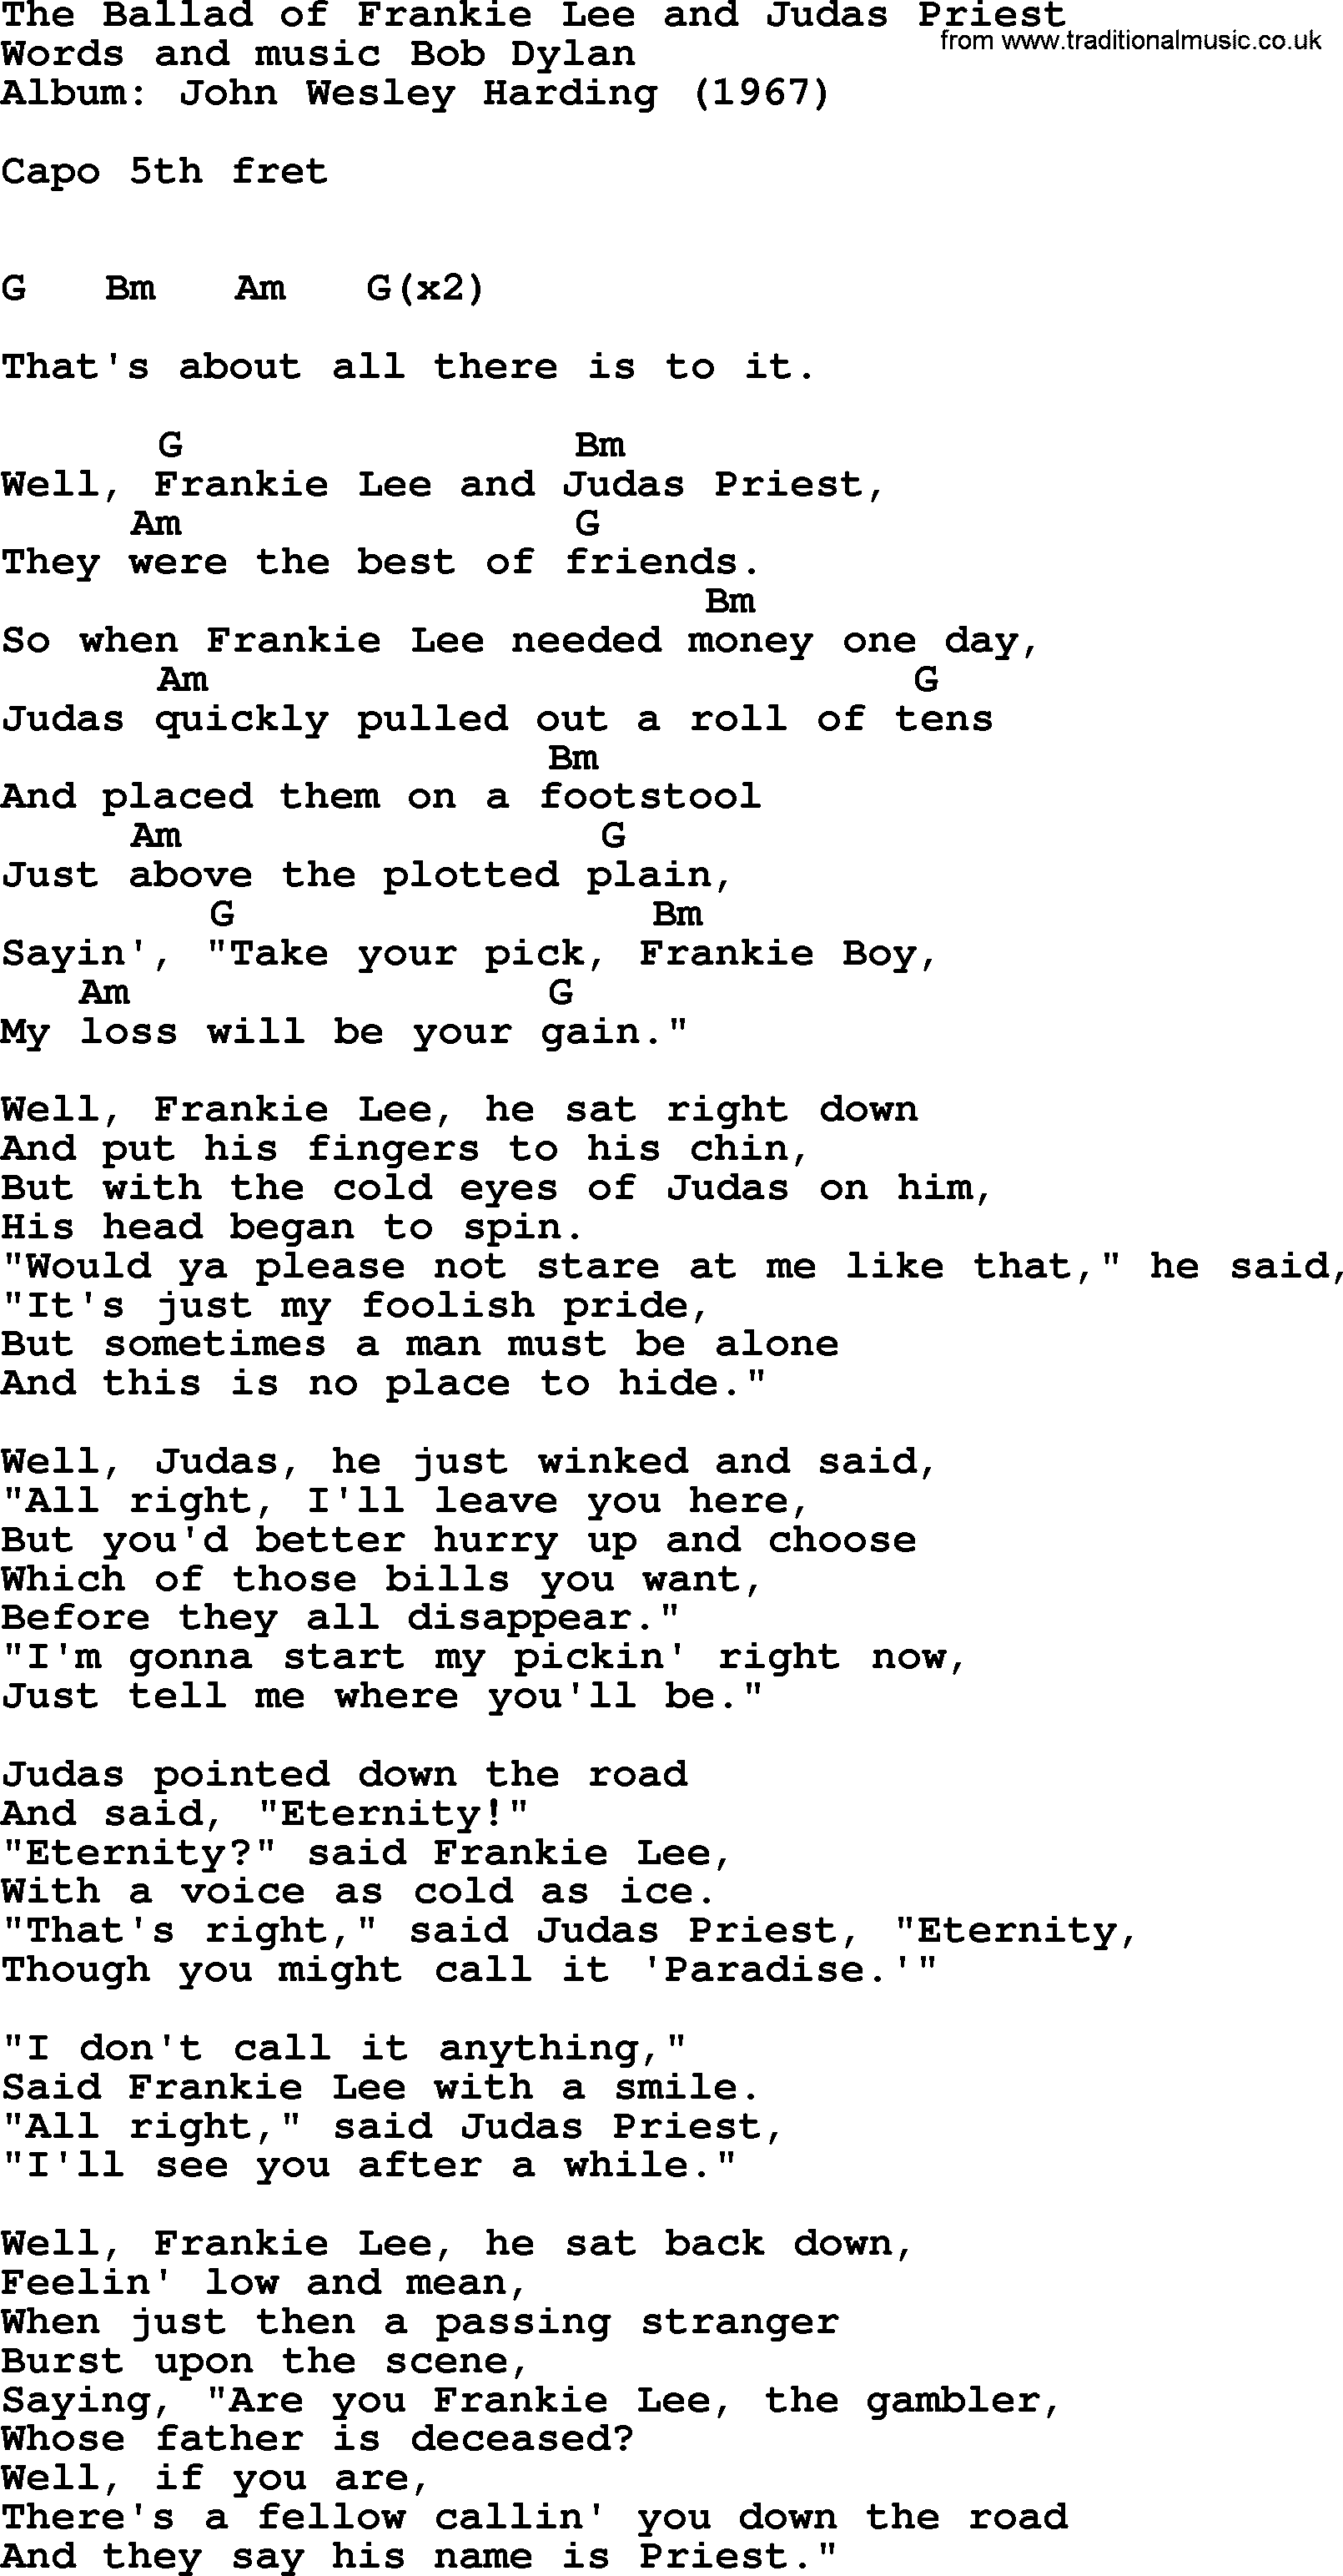 Bob Dylan song, lyrics with chords - The Ballad of Frankie Lee and Judas Priest